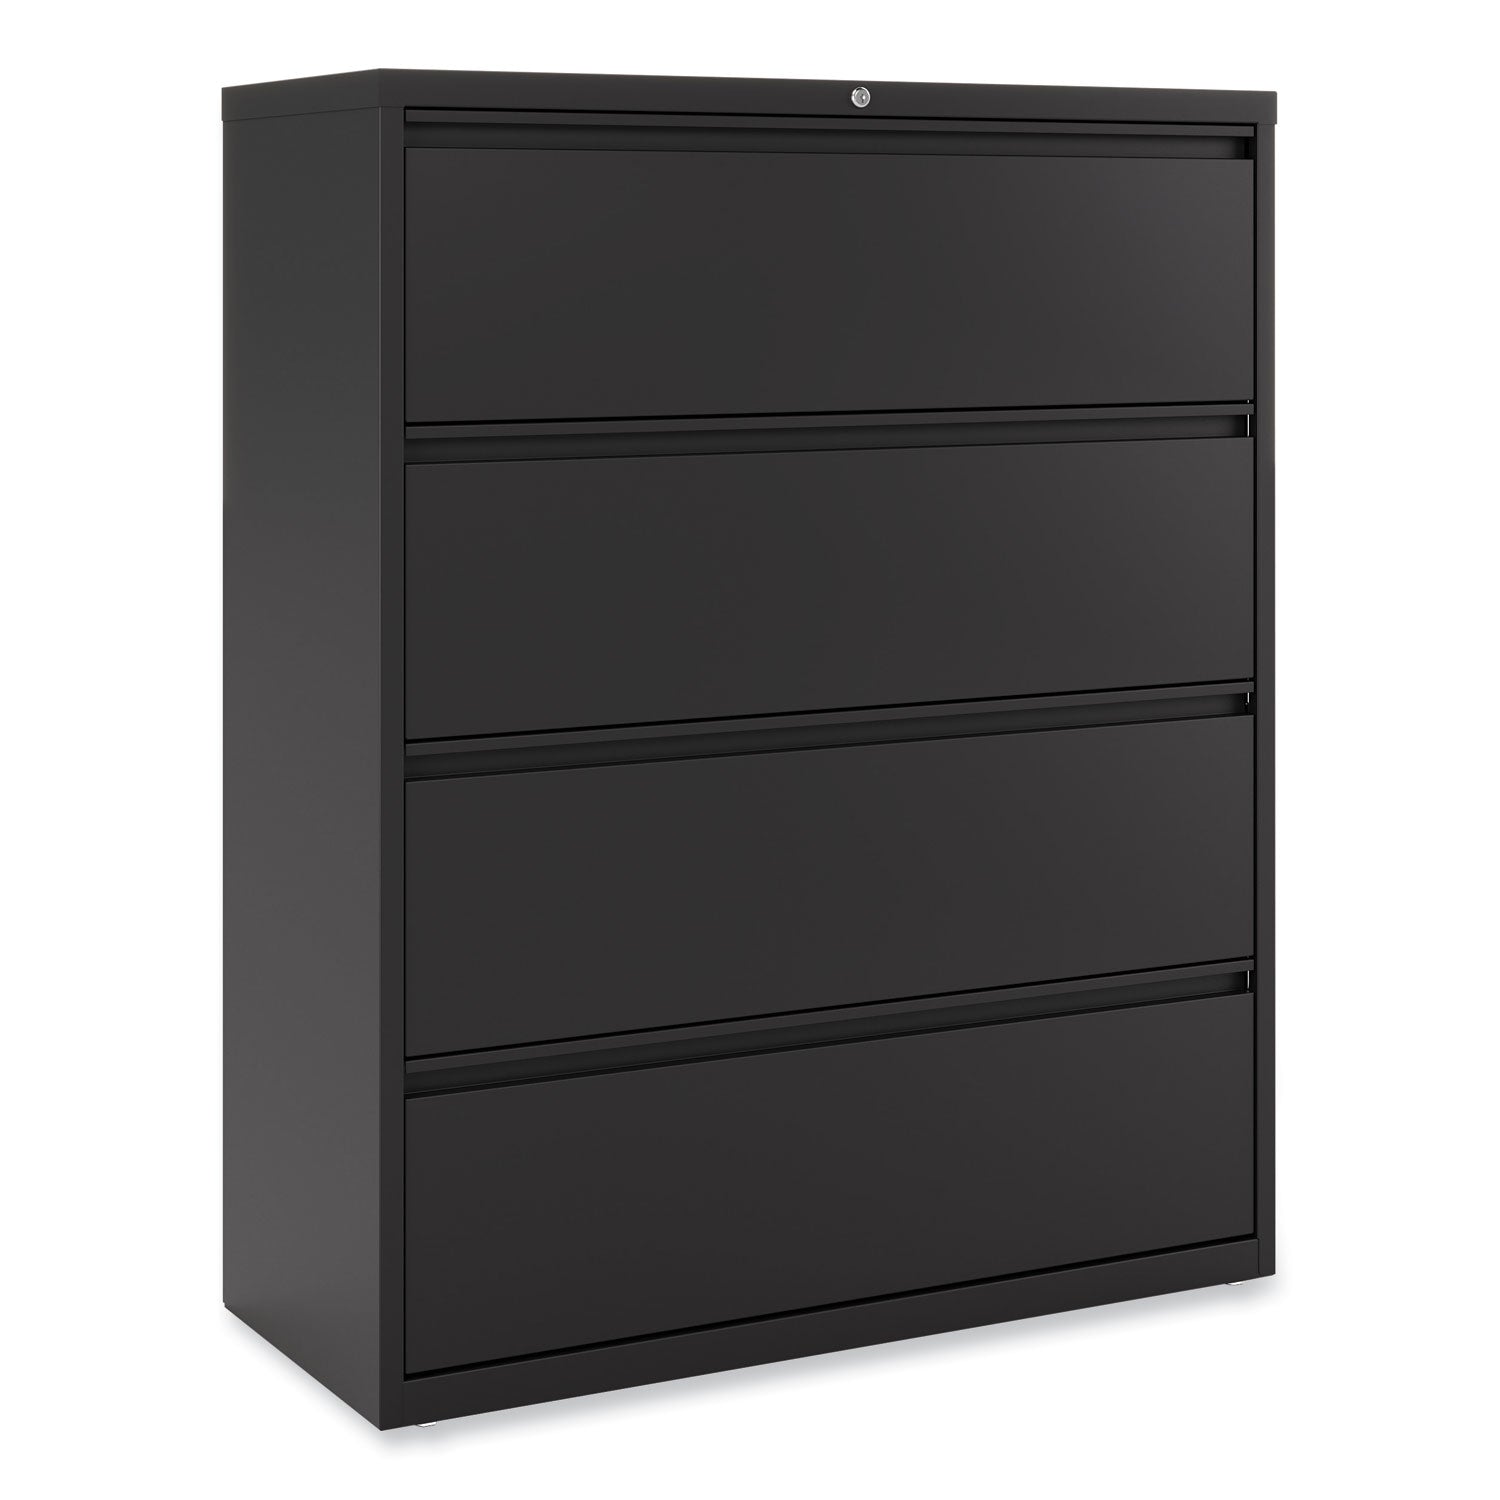 lateral-file-4-legal-letter-size-file-drawers-black-42-x-1863-x-525_alehlf4254bl - 1